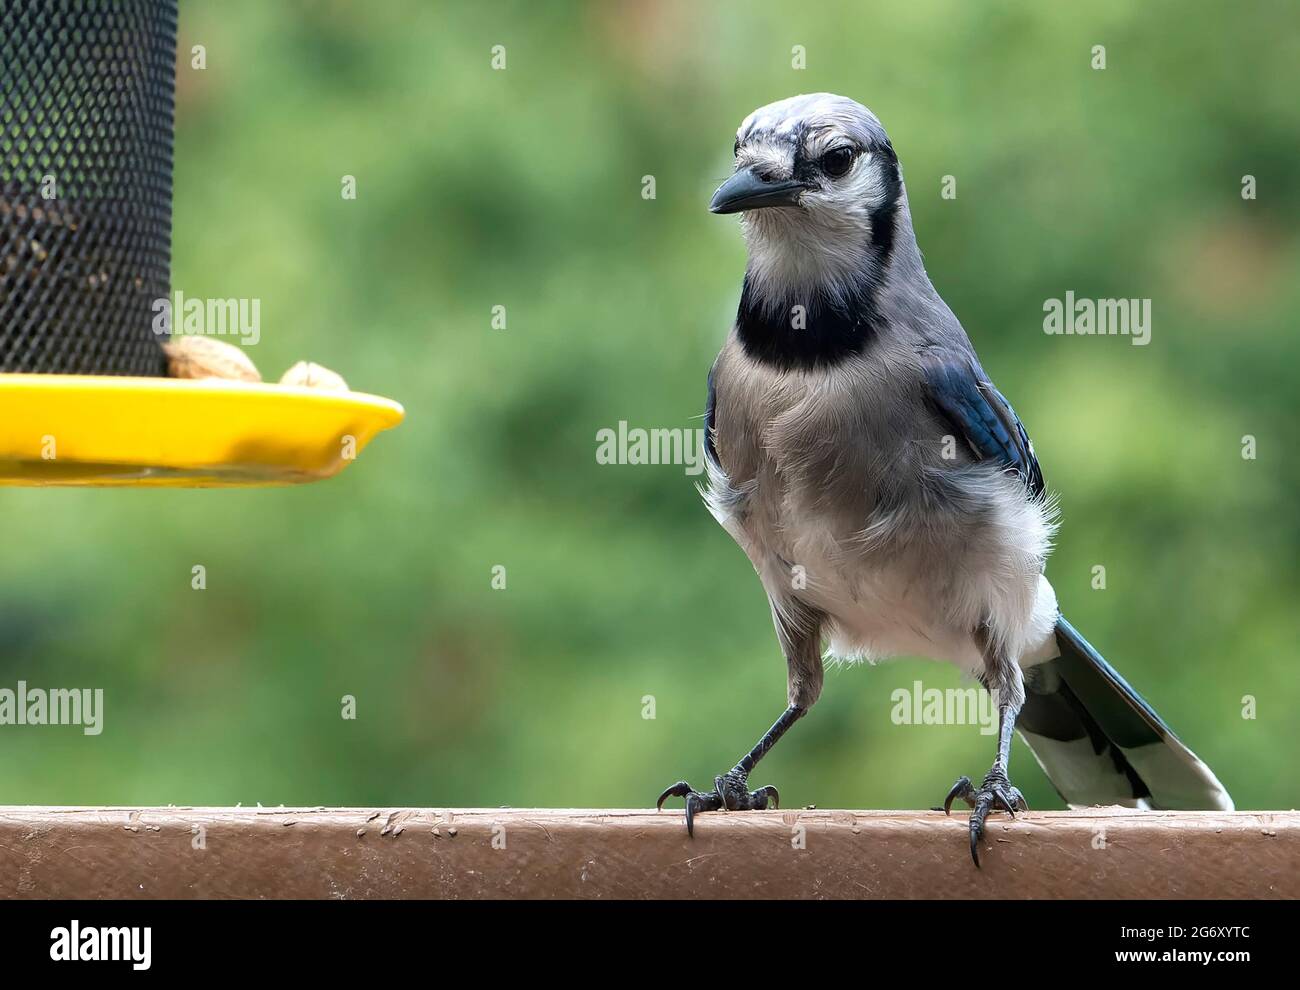 Bluejay paying attention to its surroundings on a backyard fountain Stock Photo